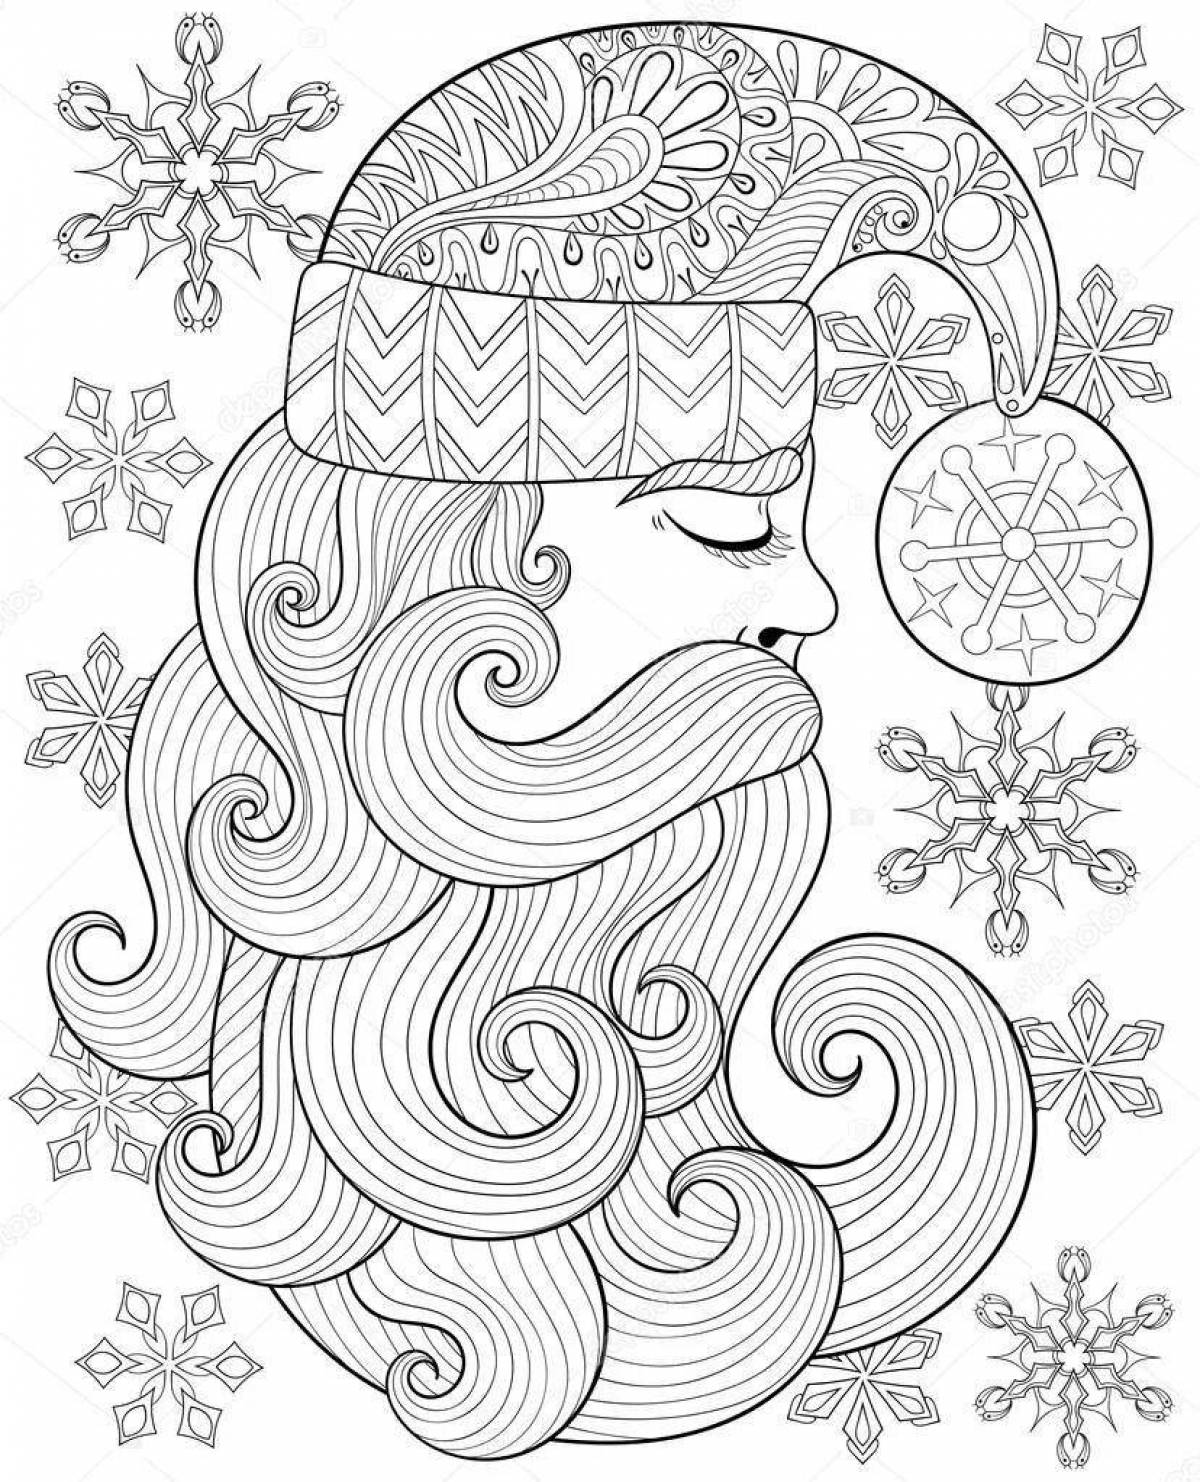 Santa claus relaxing coloring page